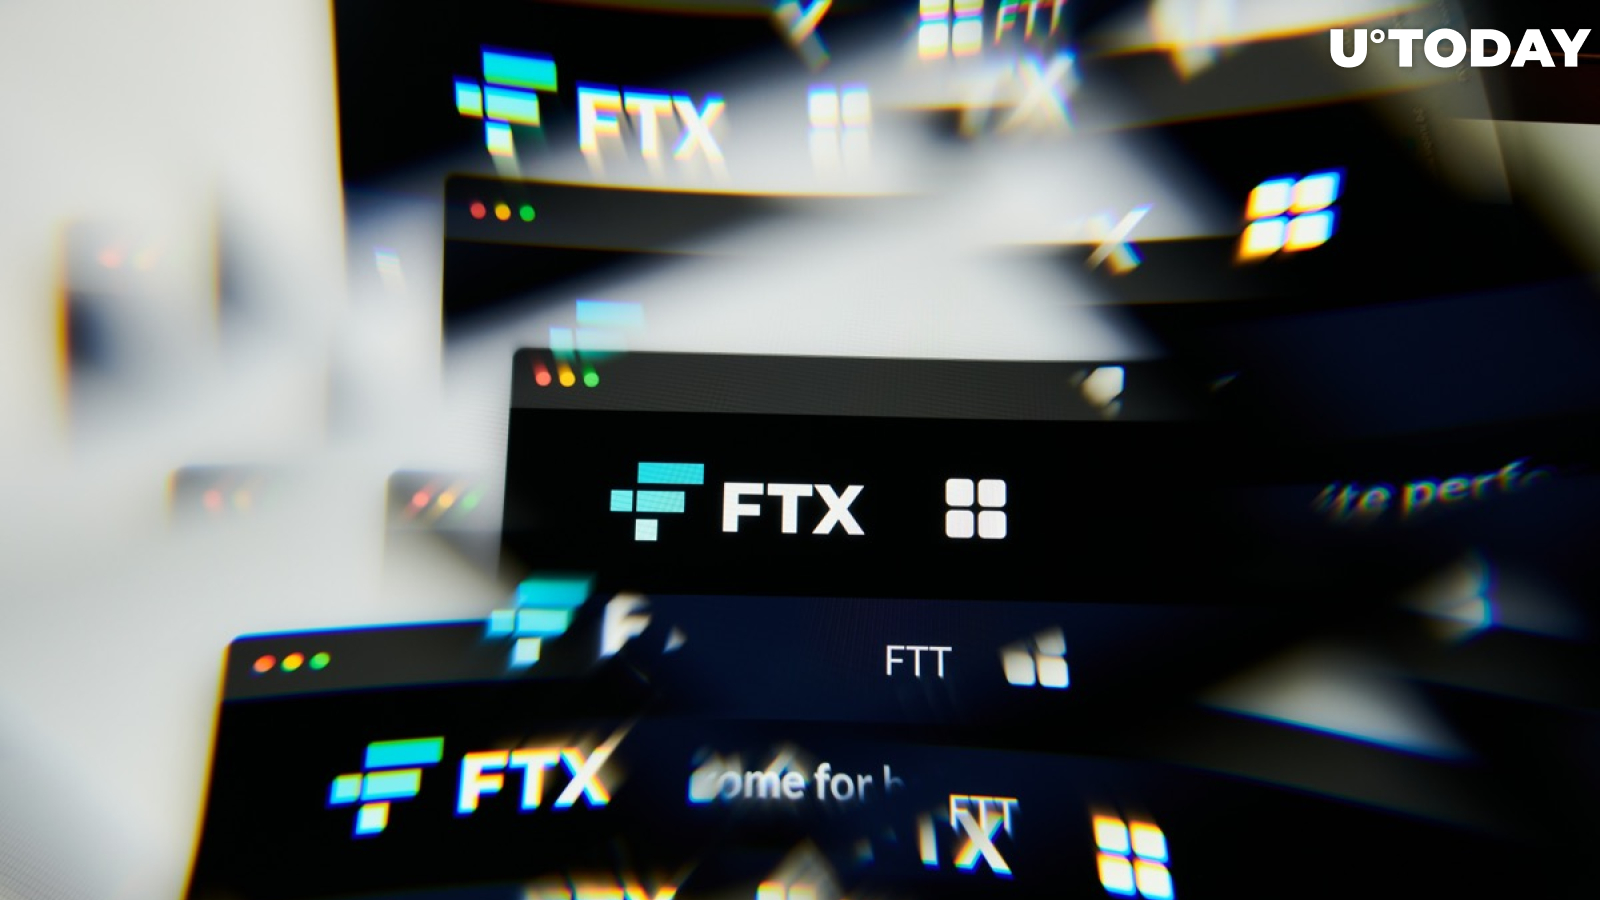 FTX Recoups $7.3B in Assets, Eyes Comeback